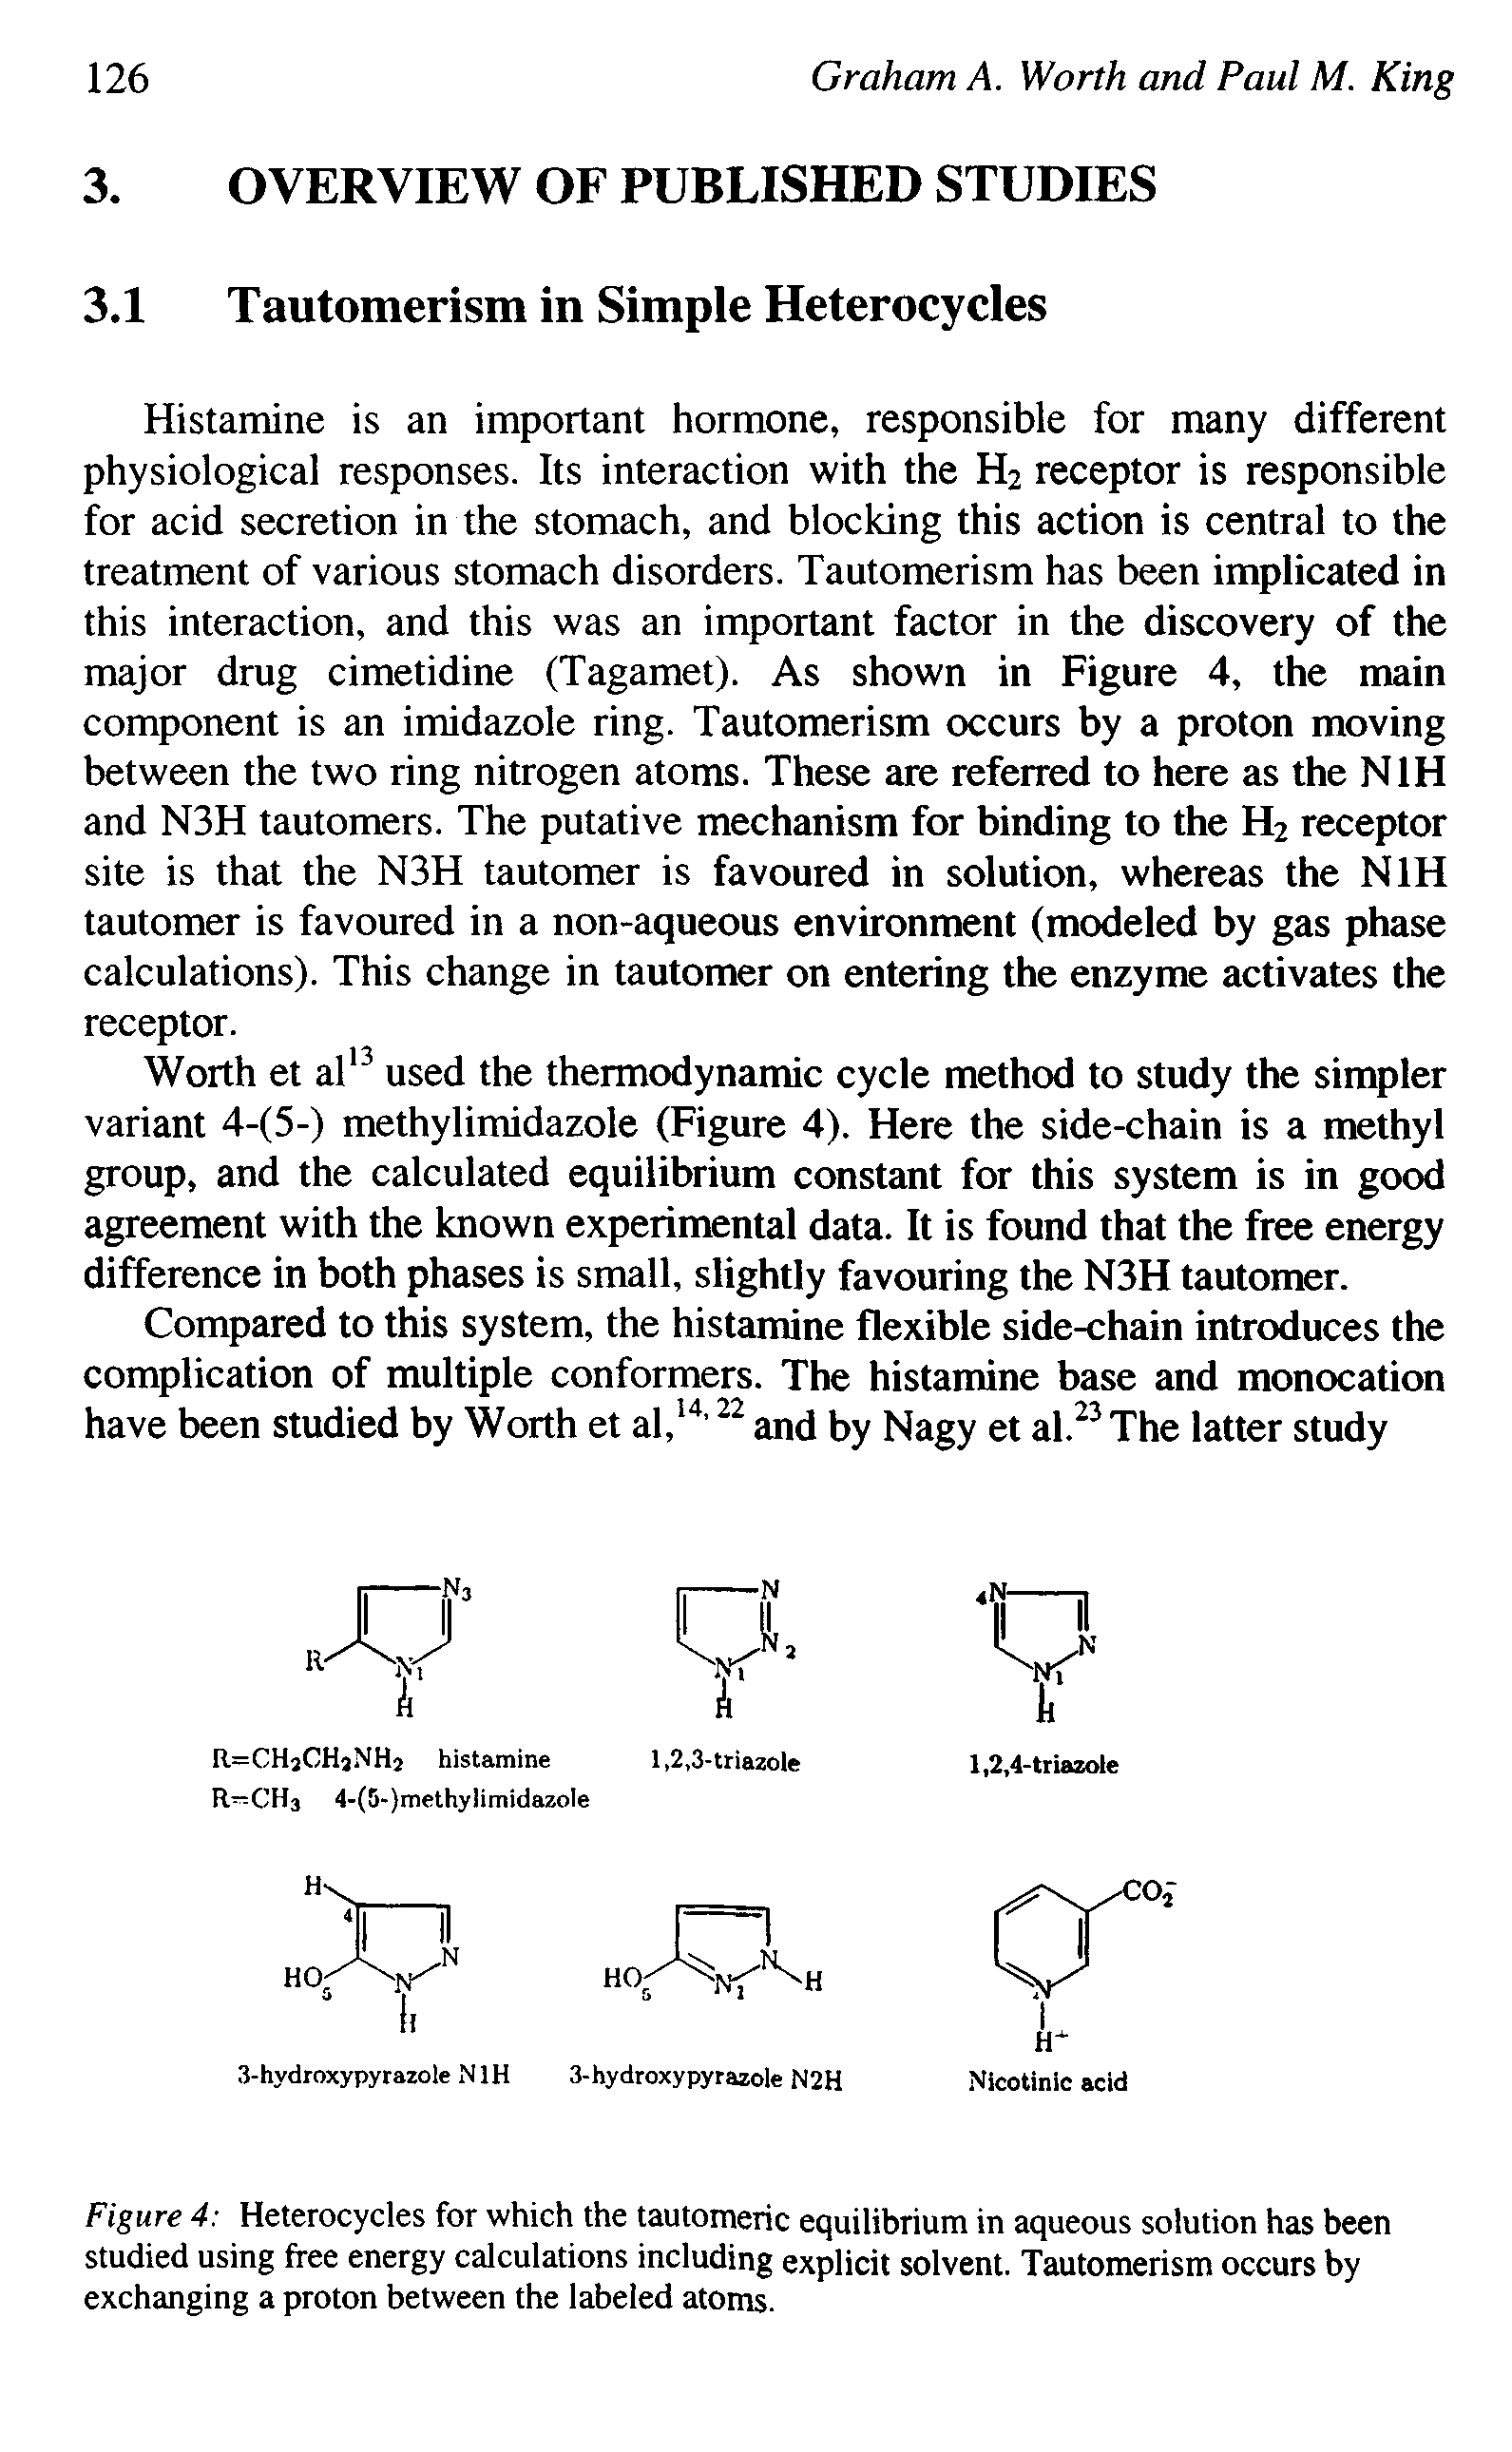 Figure 4 Heterocycles for which the tautomeric equilibrium in aqueous solution has been studied using free energy calculations including explicit solvent. Tautomerism occurs by exchanging a proton between the labeled atoms.